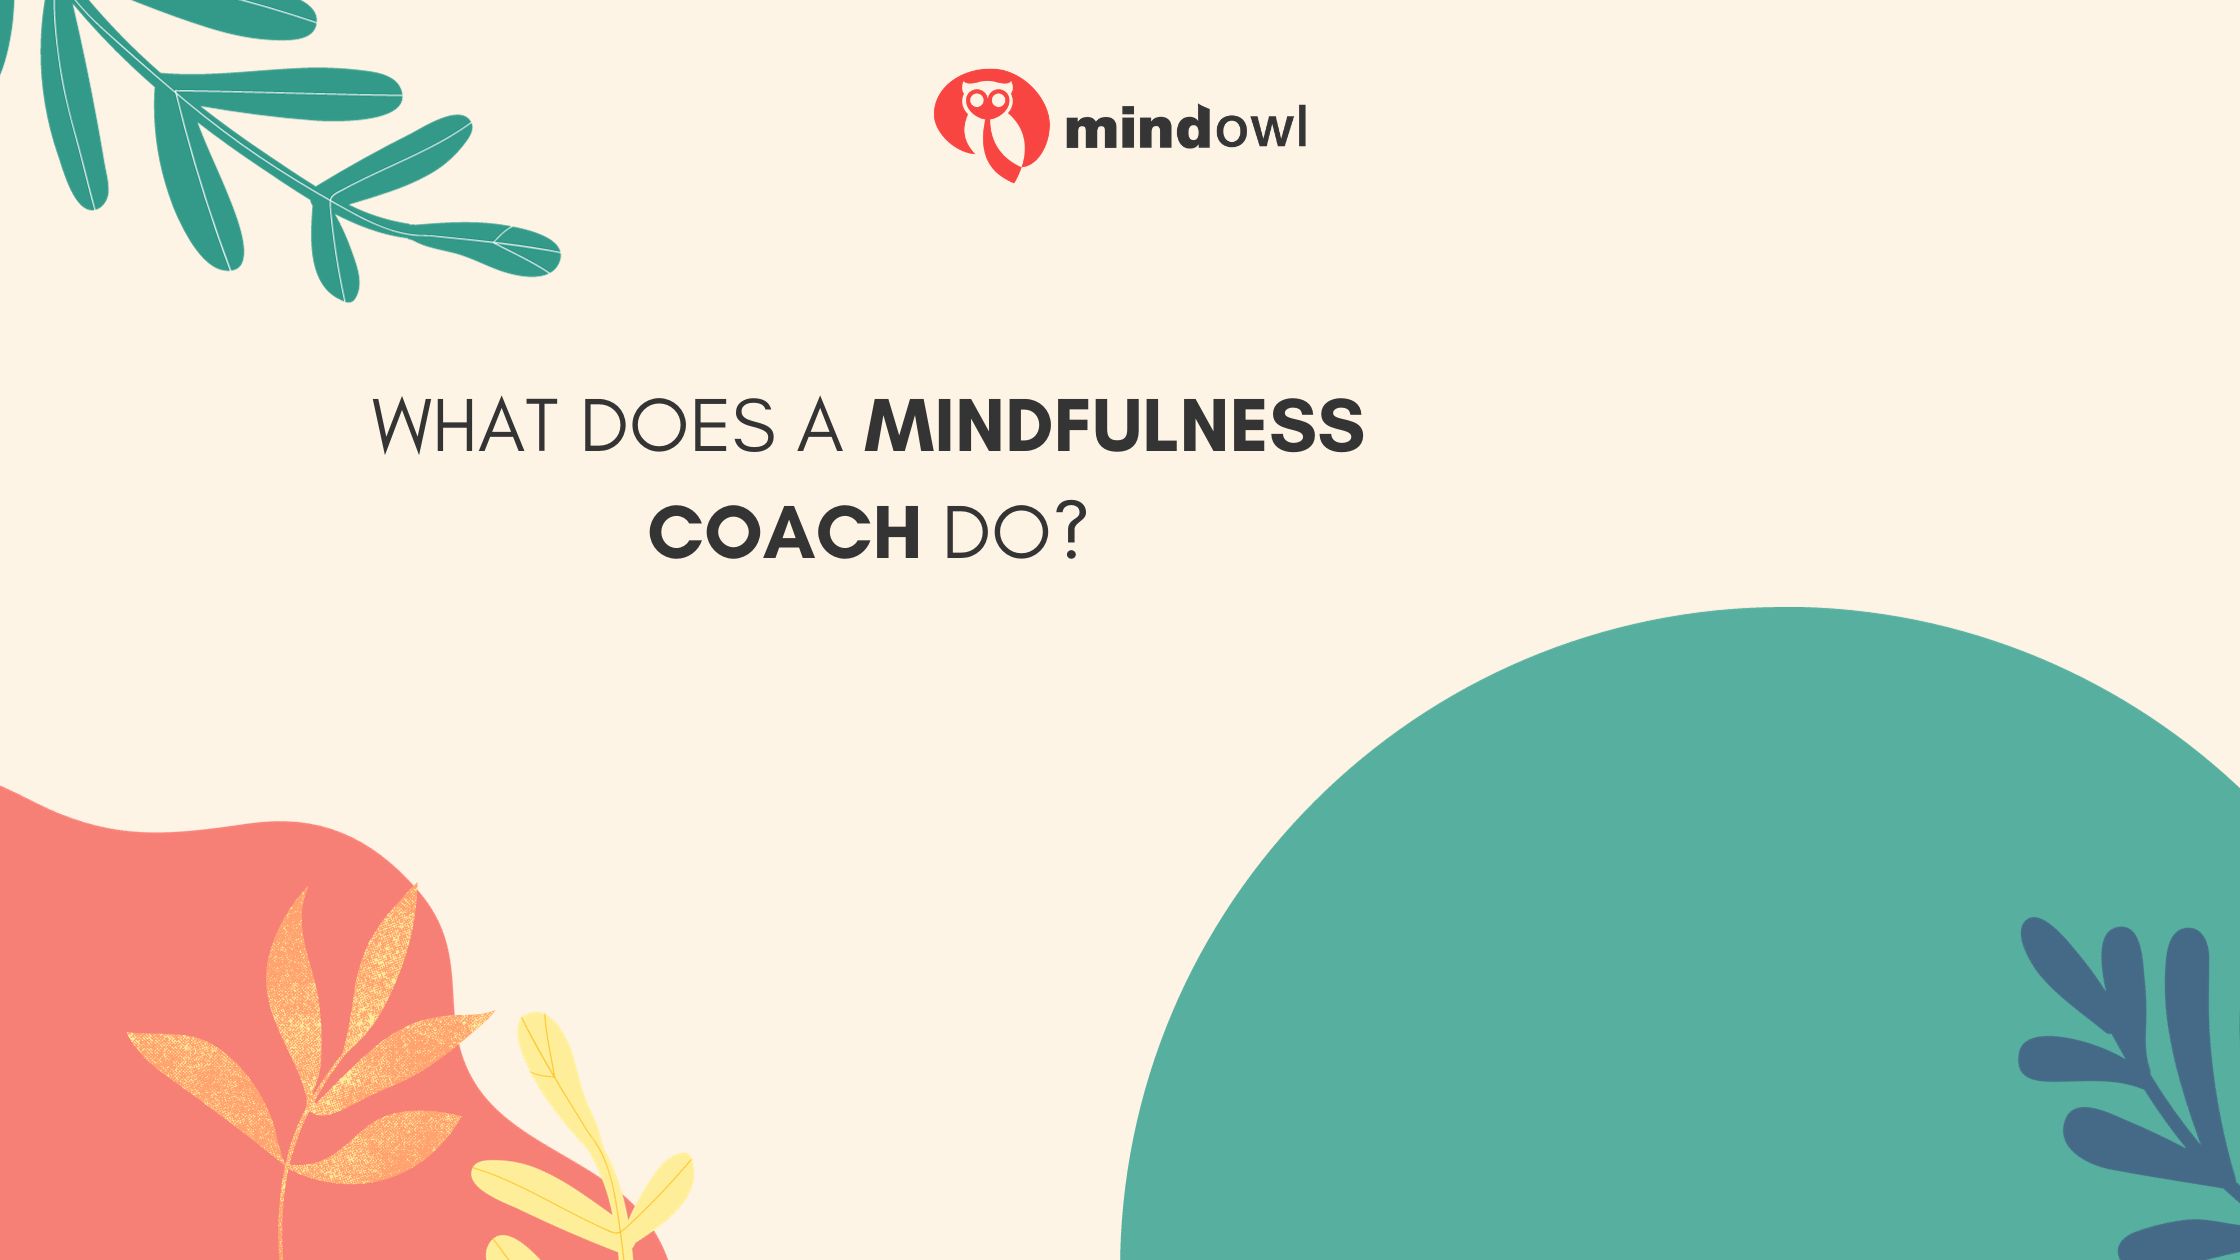 What does a mindfulness coach do?